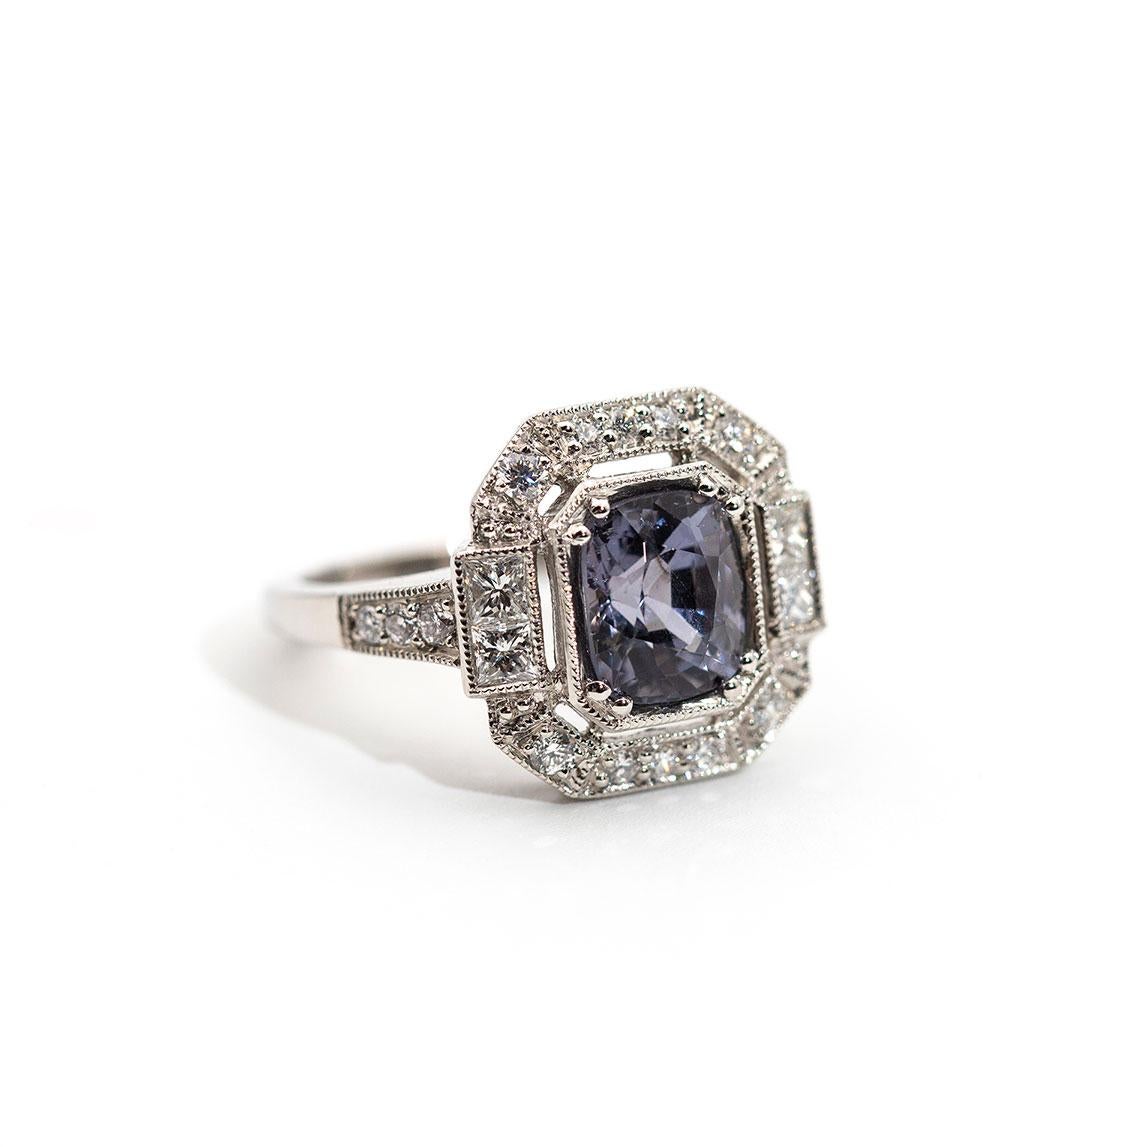 This ring is forged in platinum and boasts a heart-stopping bright 2.13 carat greyish purple cushion cut spinel encompassed by 0.58 carats of sparkling round brilliant cut diamonds and princess cut diamonds. We have named this alluring beauty The